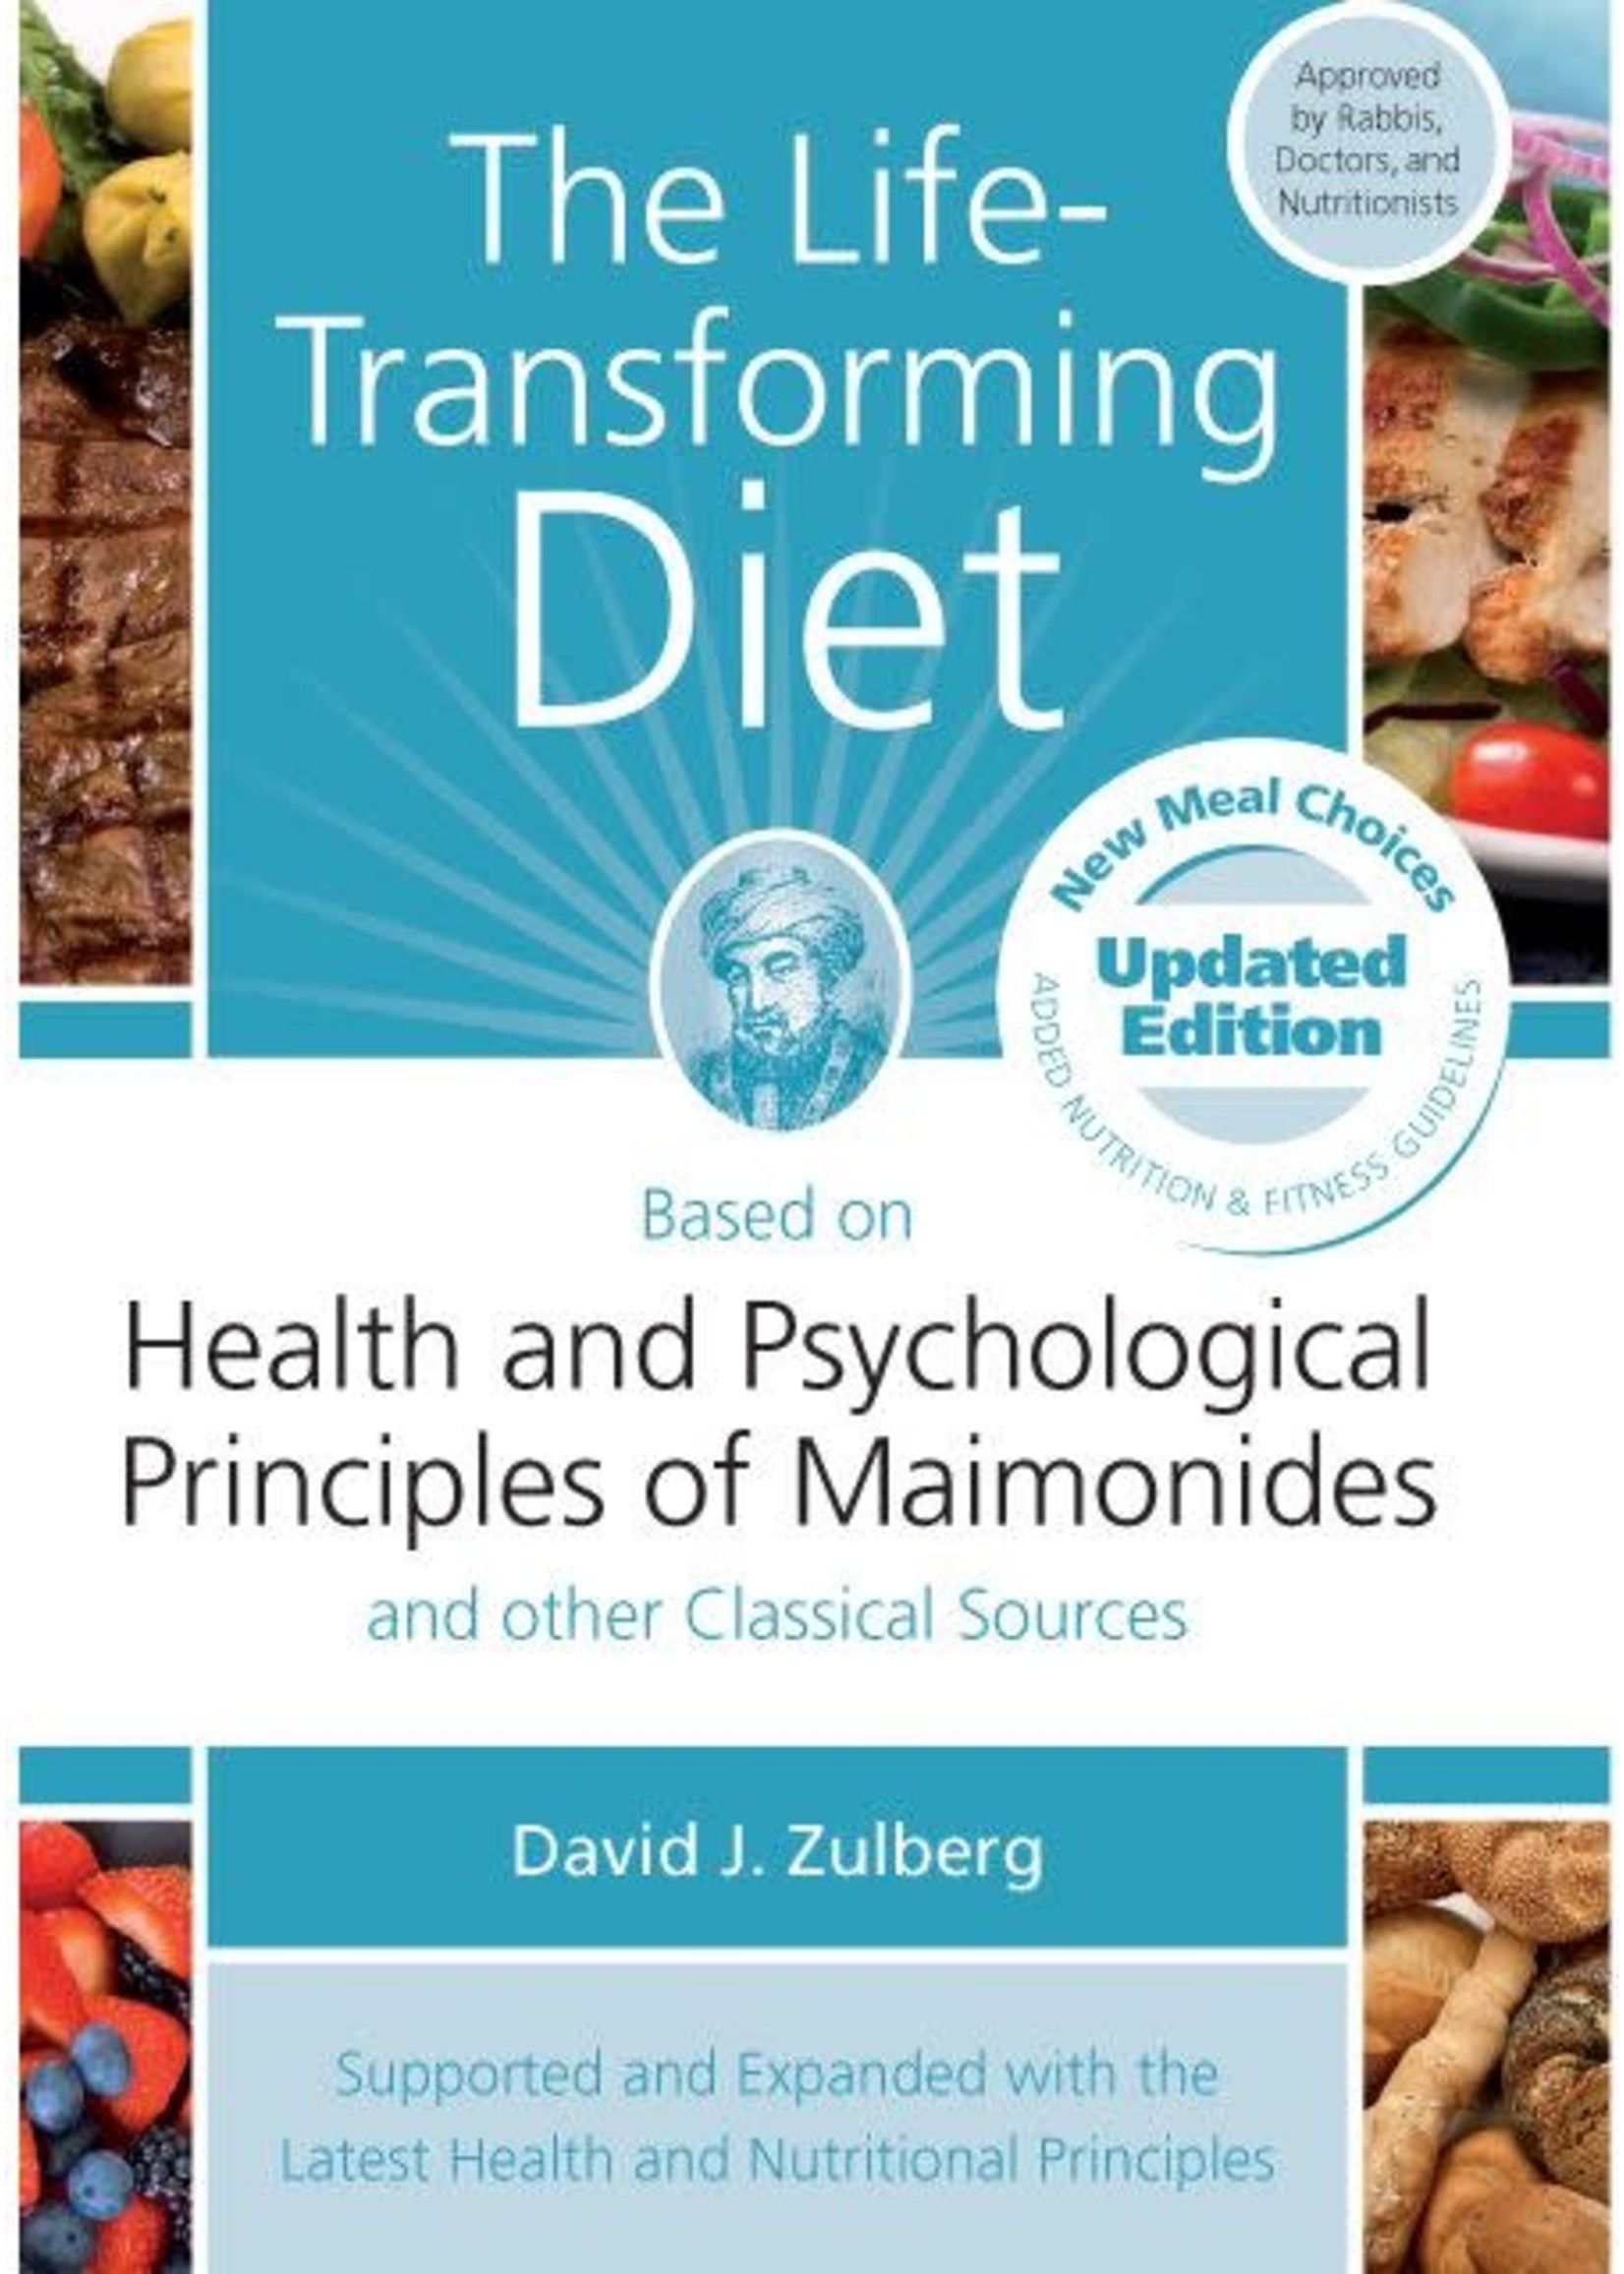 THE LIFE TRANSFORMING DIET